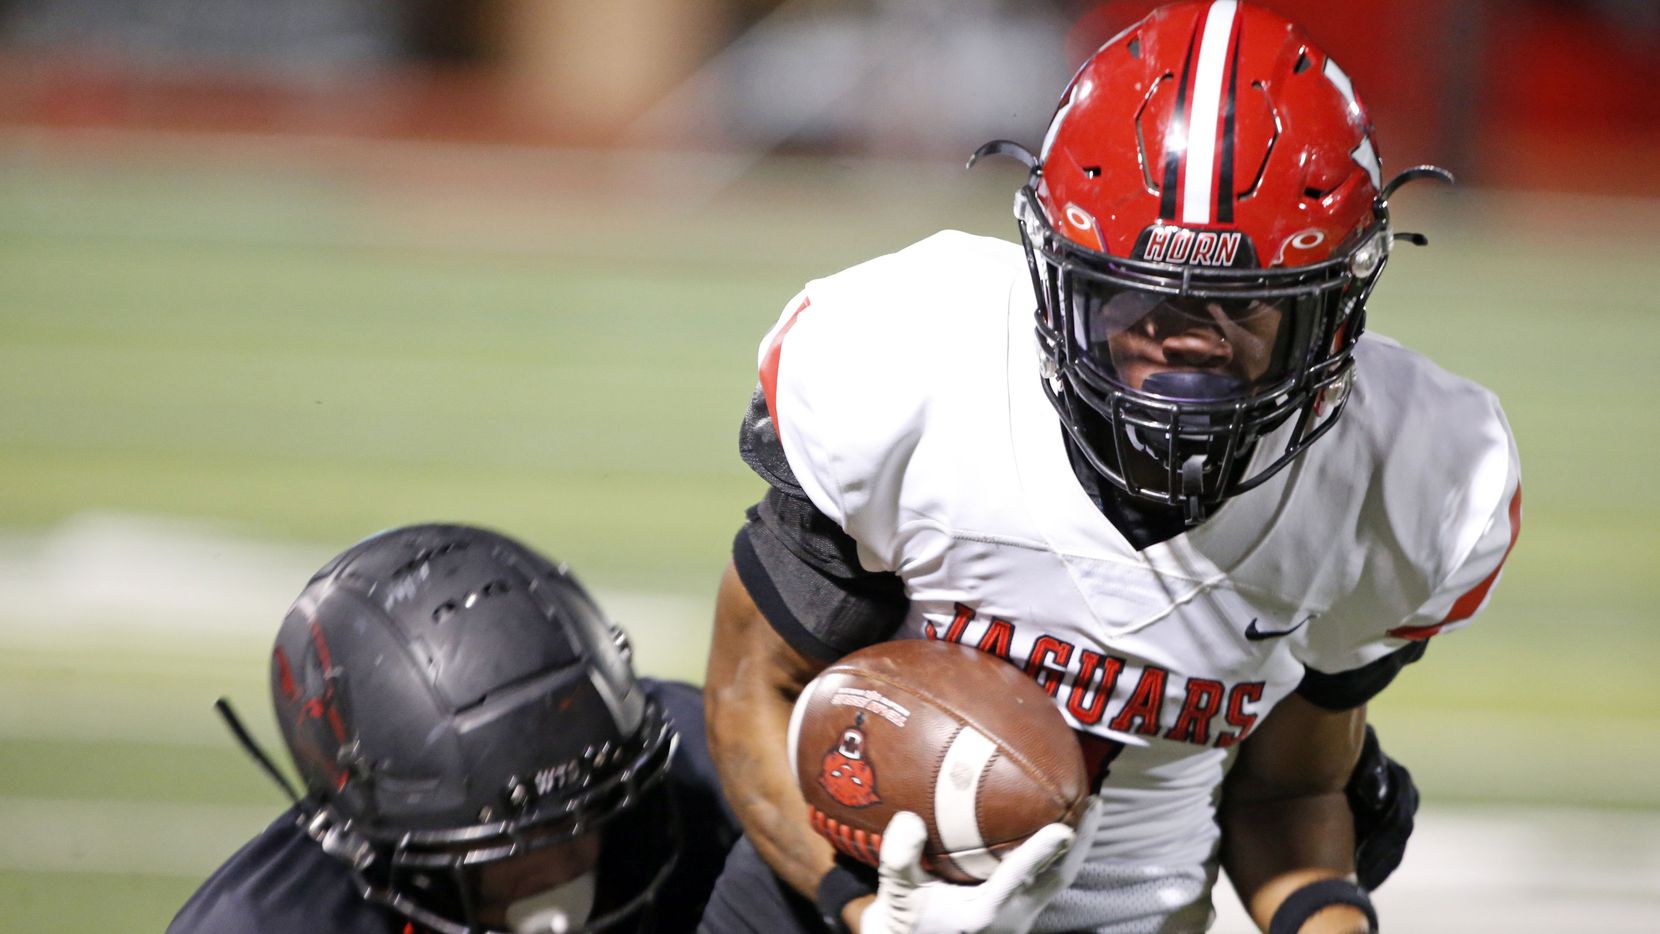 Mesquite Horn looks ready for the playoffs as it rallies to beat